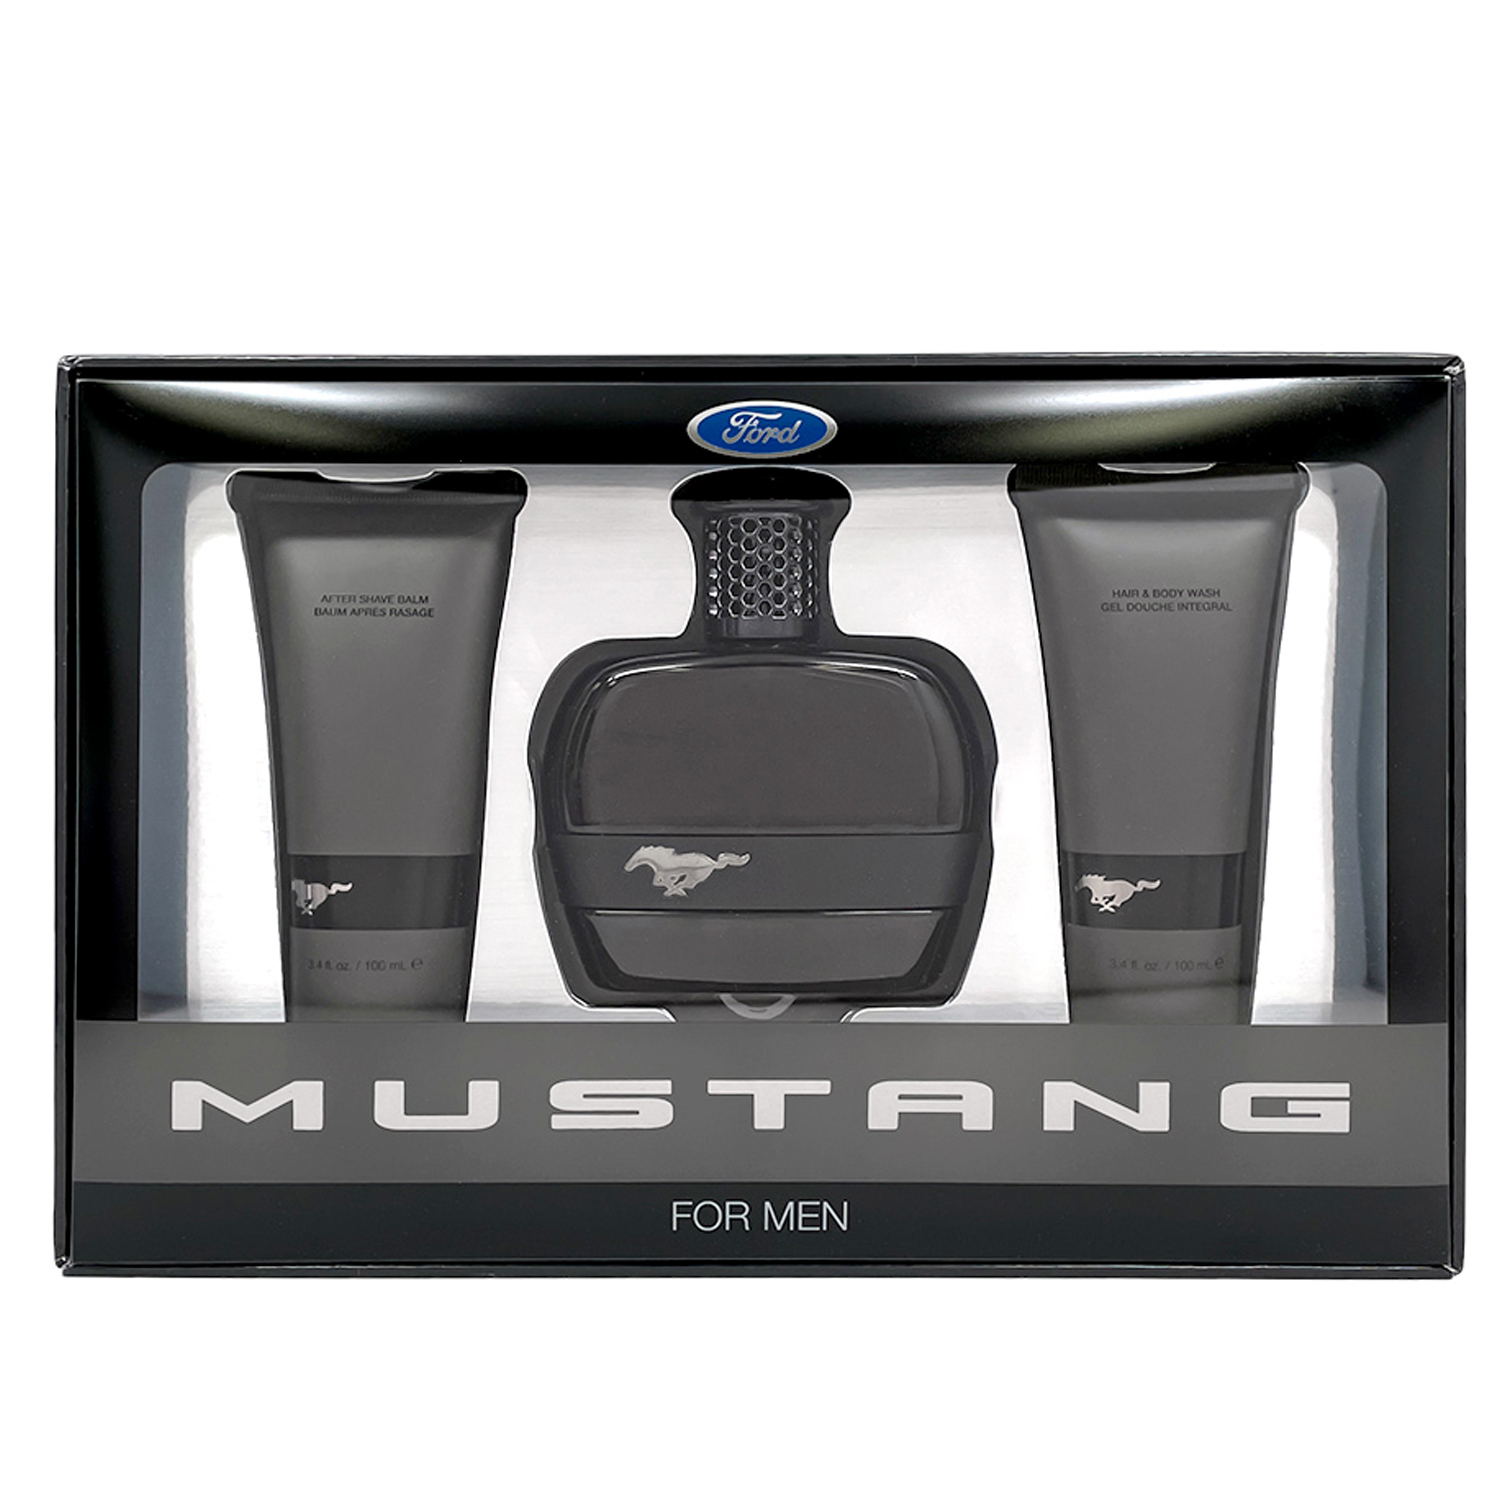 - Shave Wash Mustang Hair and Balm Oz / 3.4 Body Black Oz Edt/3.4 Oz Beauty - Set After Bridge 3.4